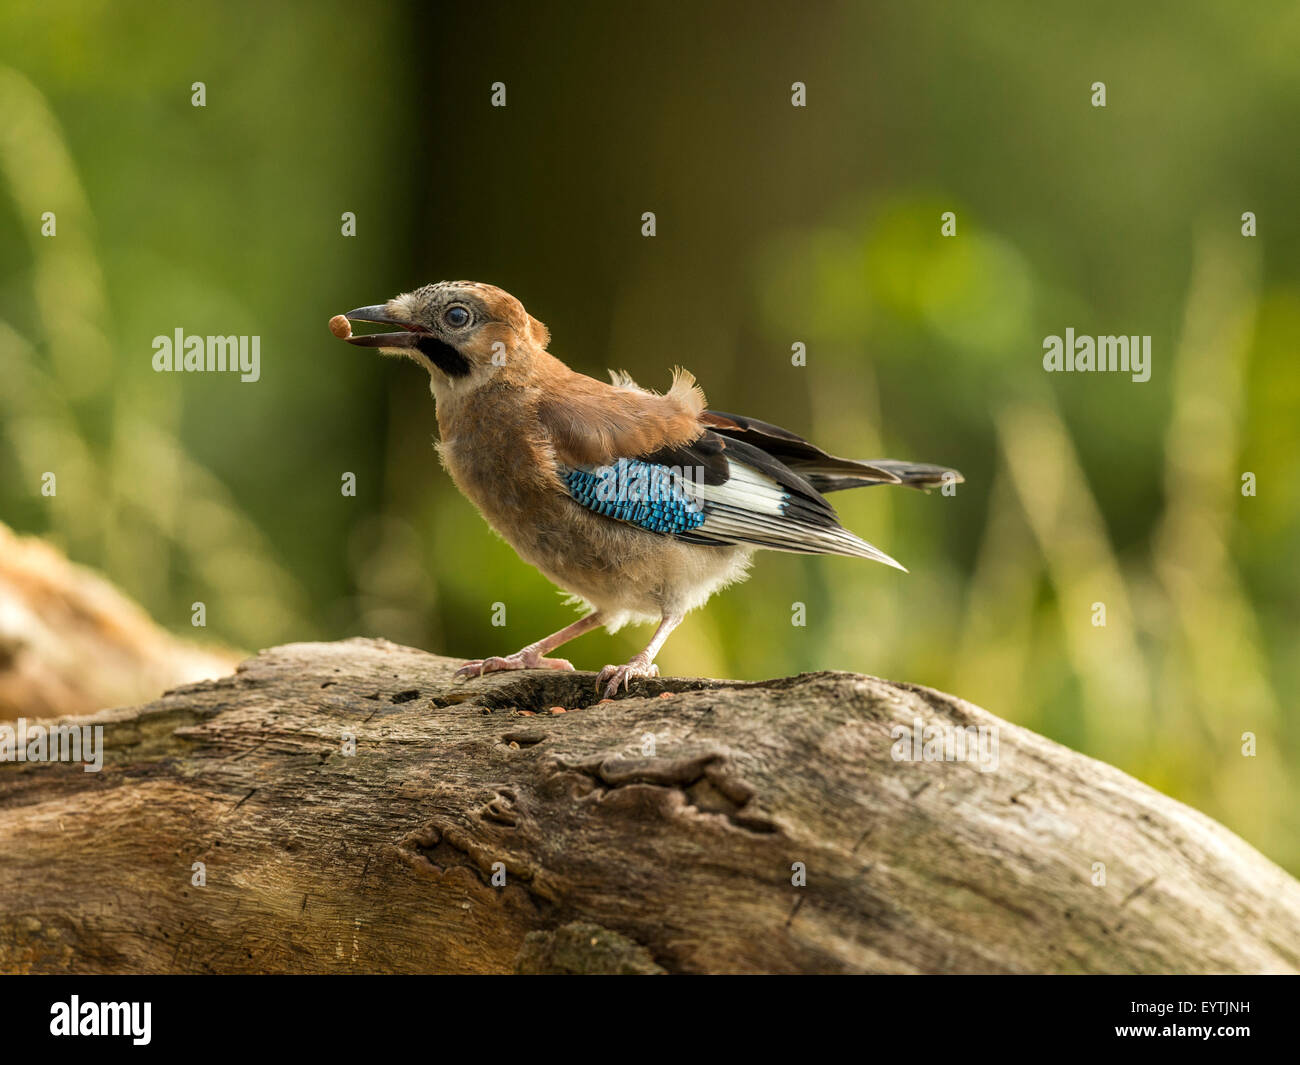 Eurasian Jay depicted perched on an old dilapidated wooden tree stump. 'Isolated against an illuminated green forest background' Stock Photo